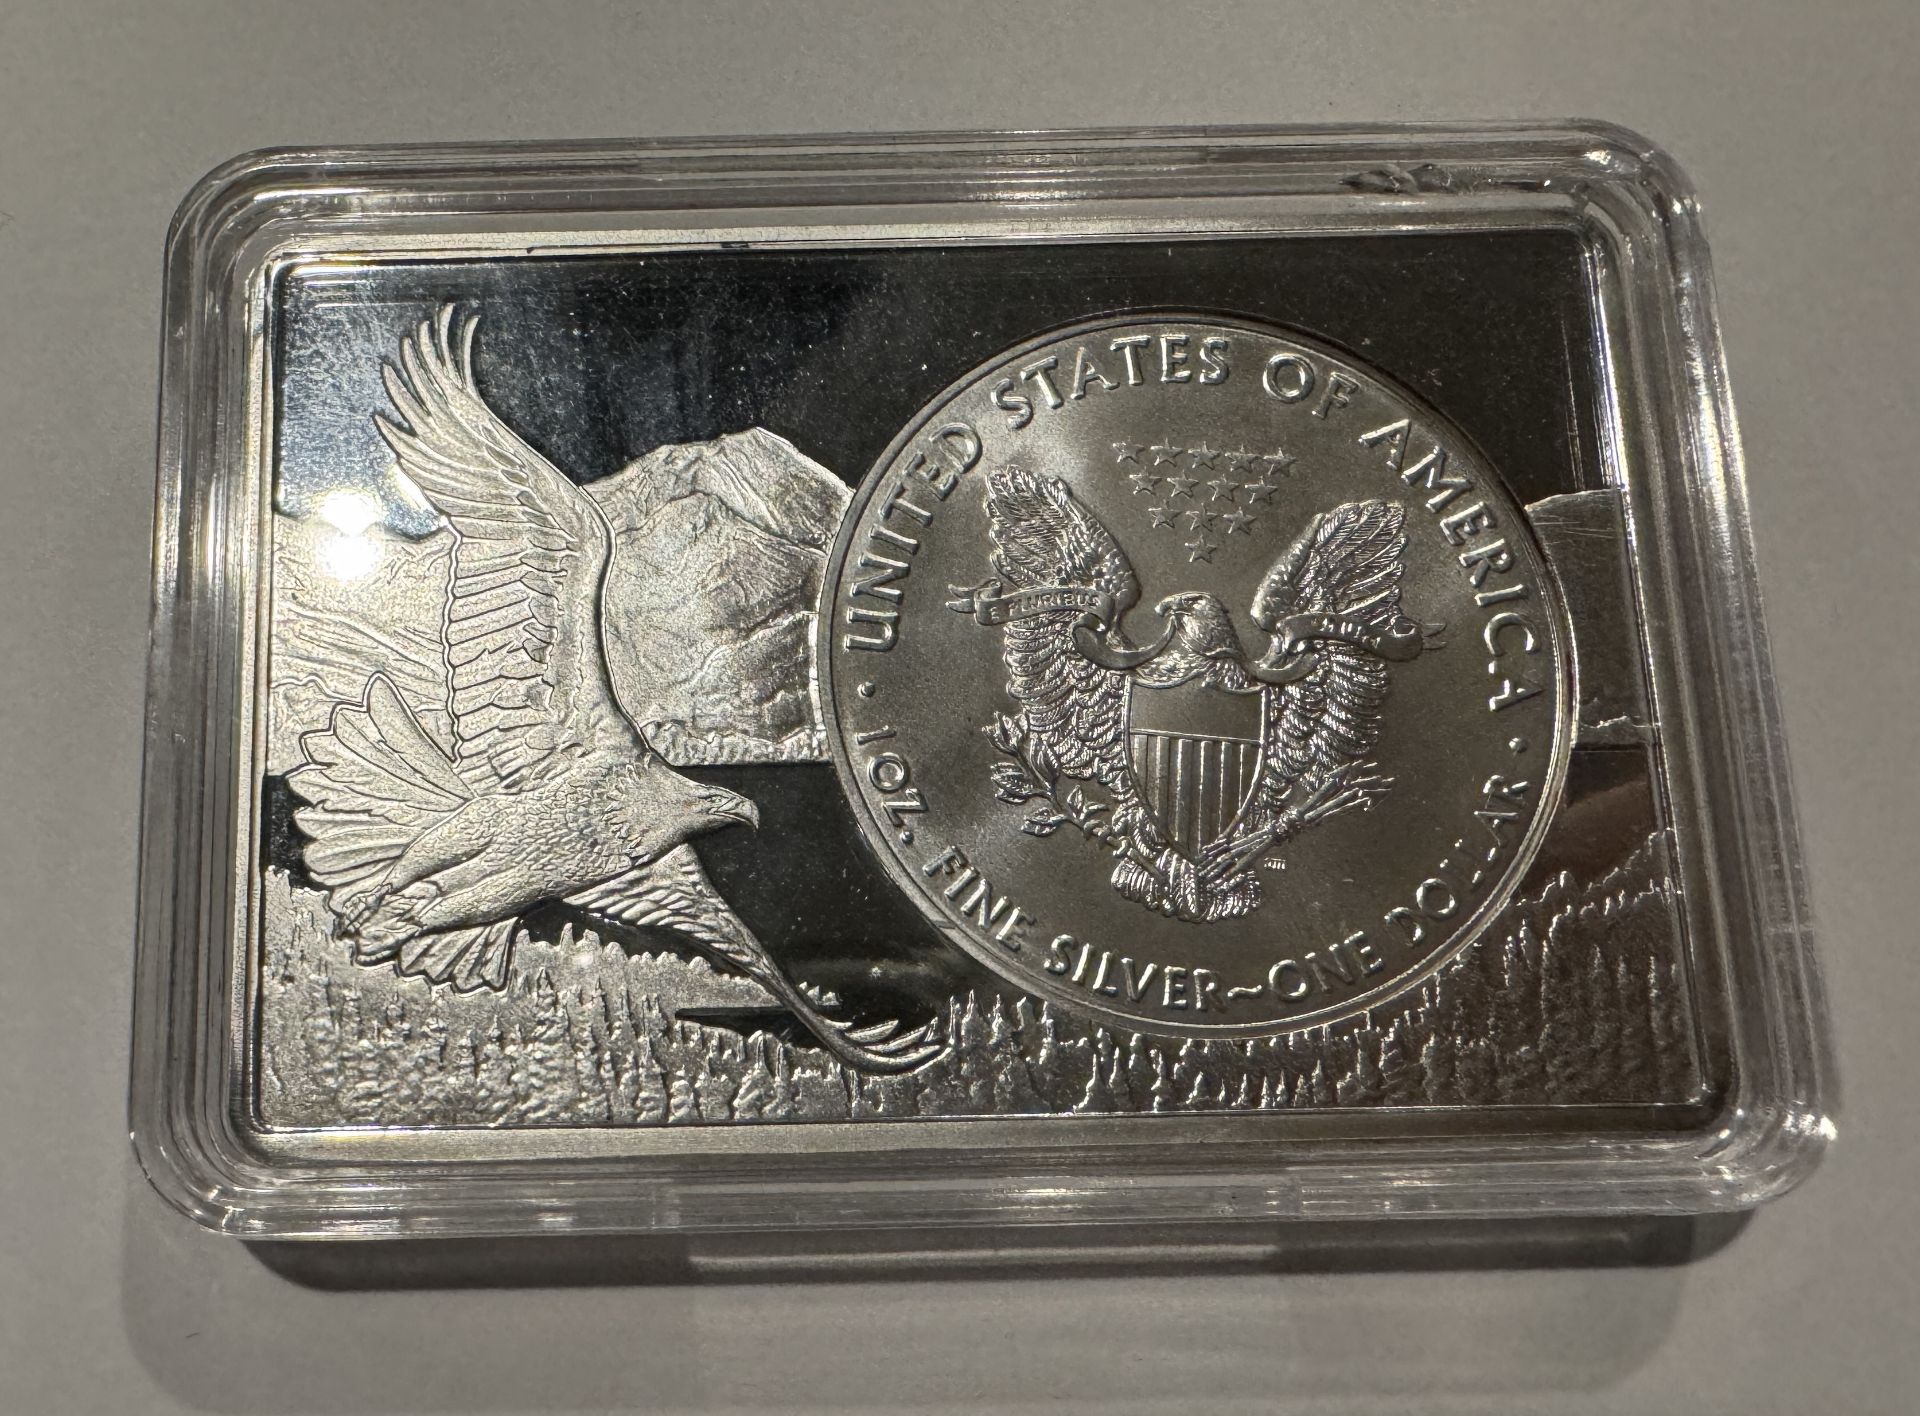 2018 SILVER LIBERTY IN A TWO TROY OUNCE BAR LARGE AMERICAN FLAG DESIGN - Image 2 of 2